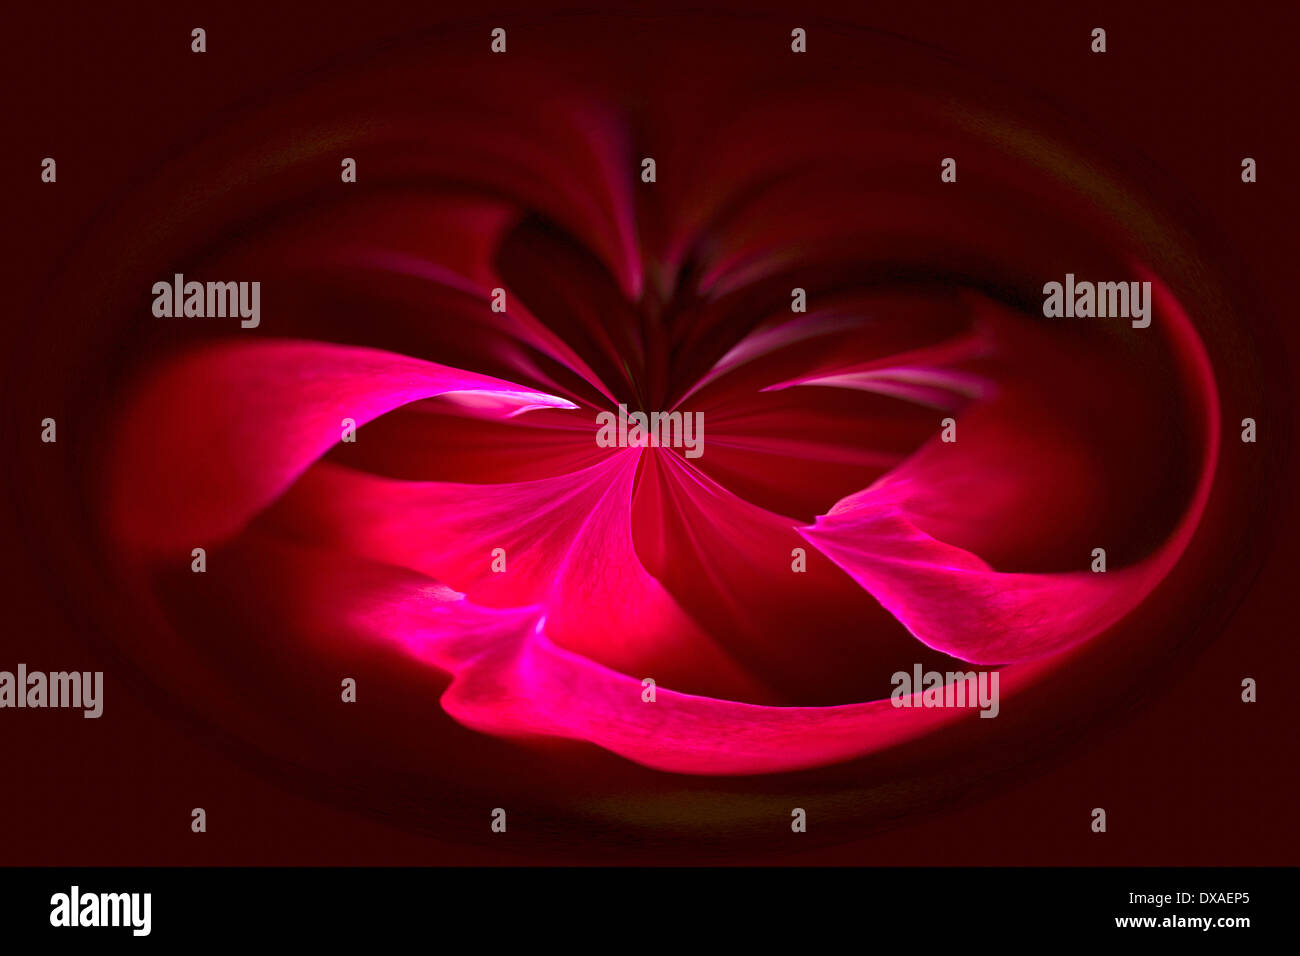 Dahlia, abstract deep red pattern against black. Stock Photo